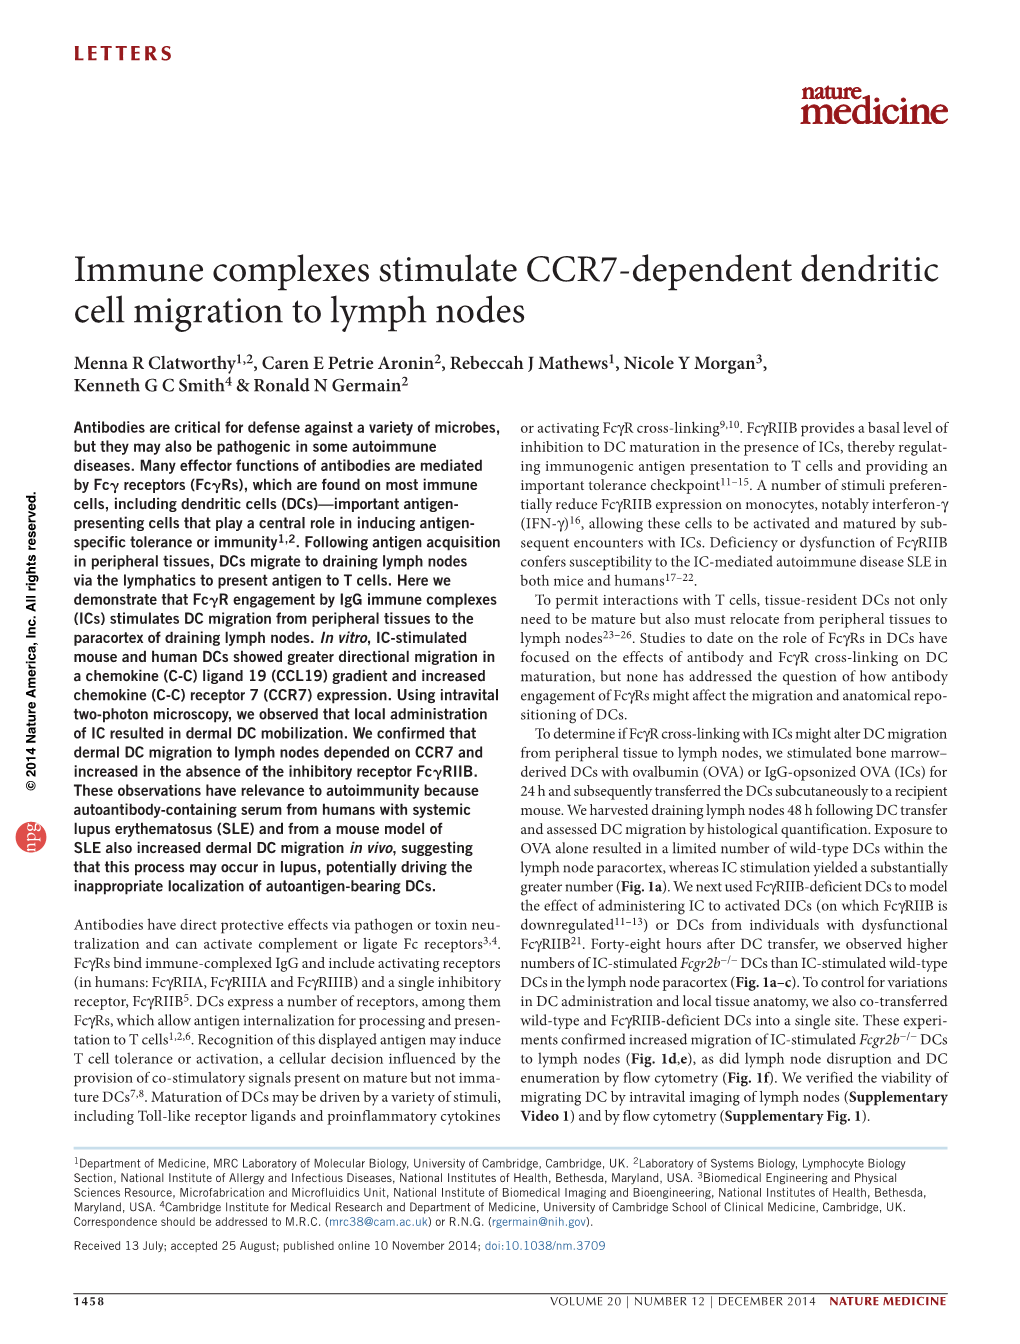 Immune Complexes Stimulate CCR7-Dependent Dendritic Cell Migration to Lymph Nodes